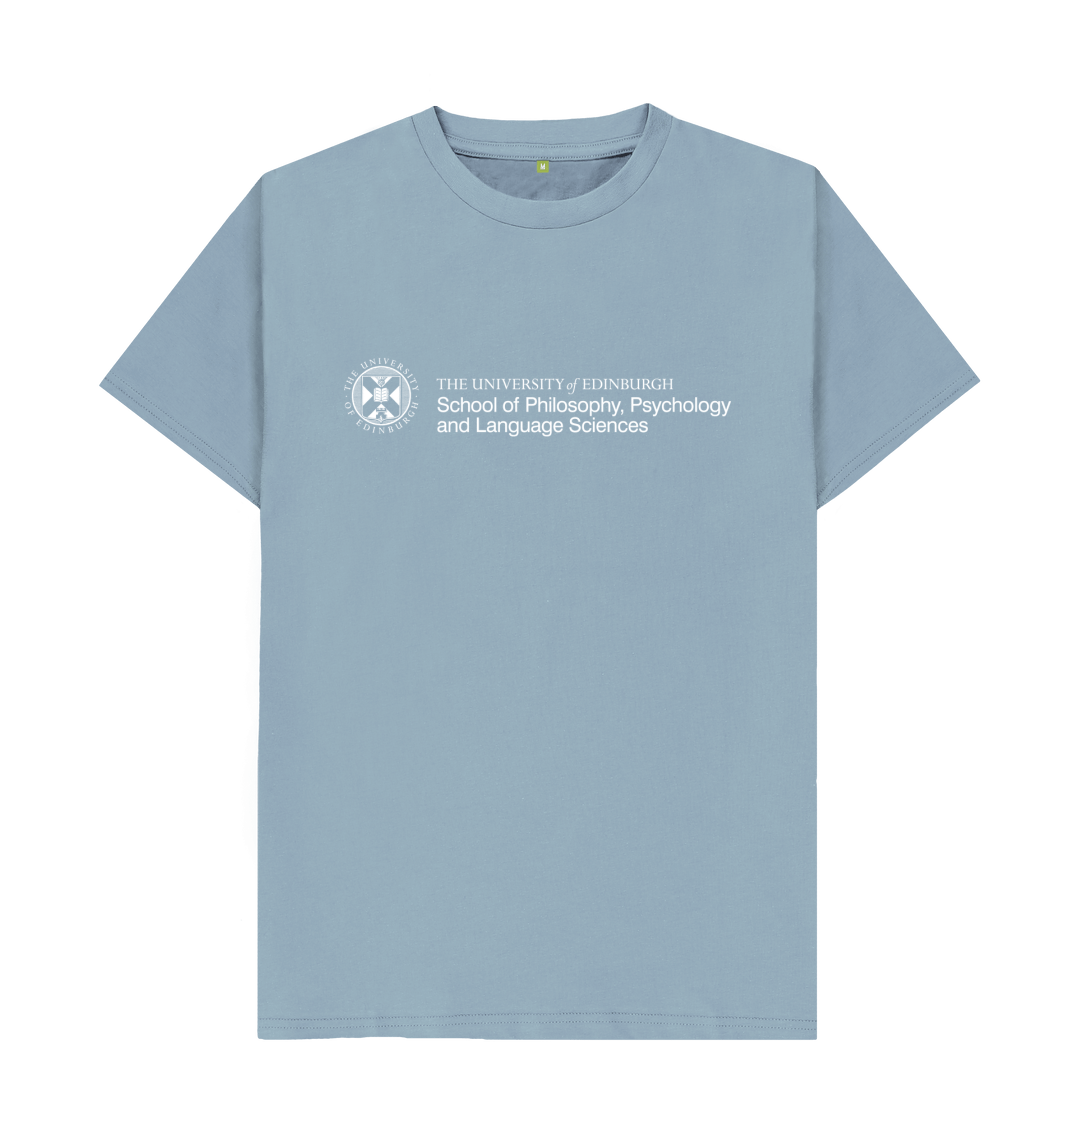 School of Philosophy, Psychology and Language Sciences T-Shirt